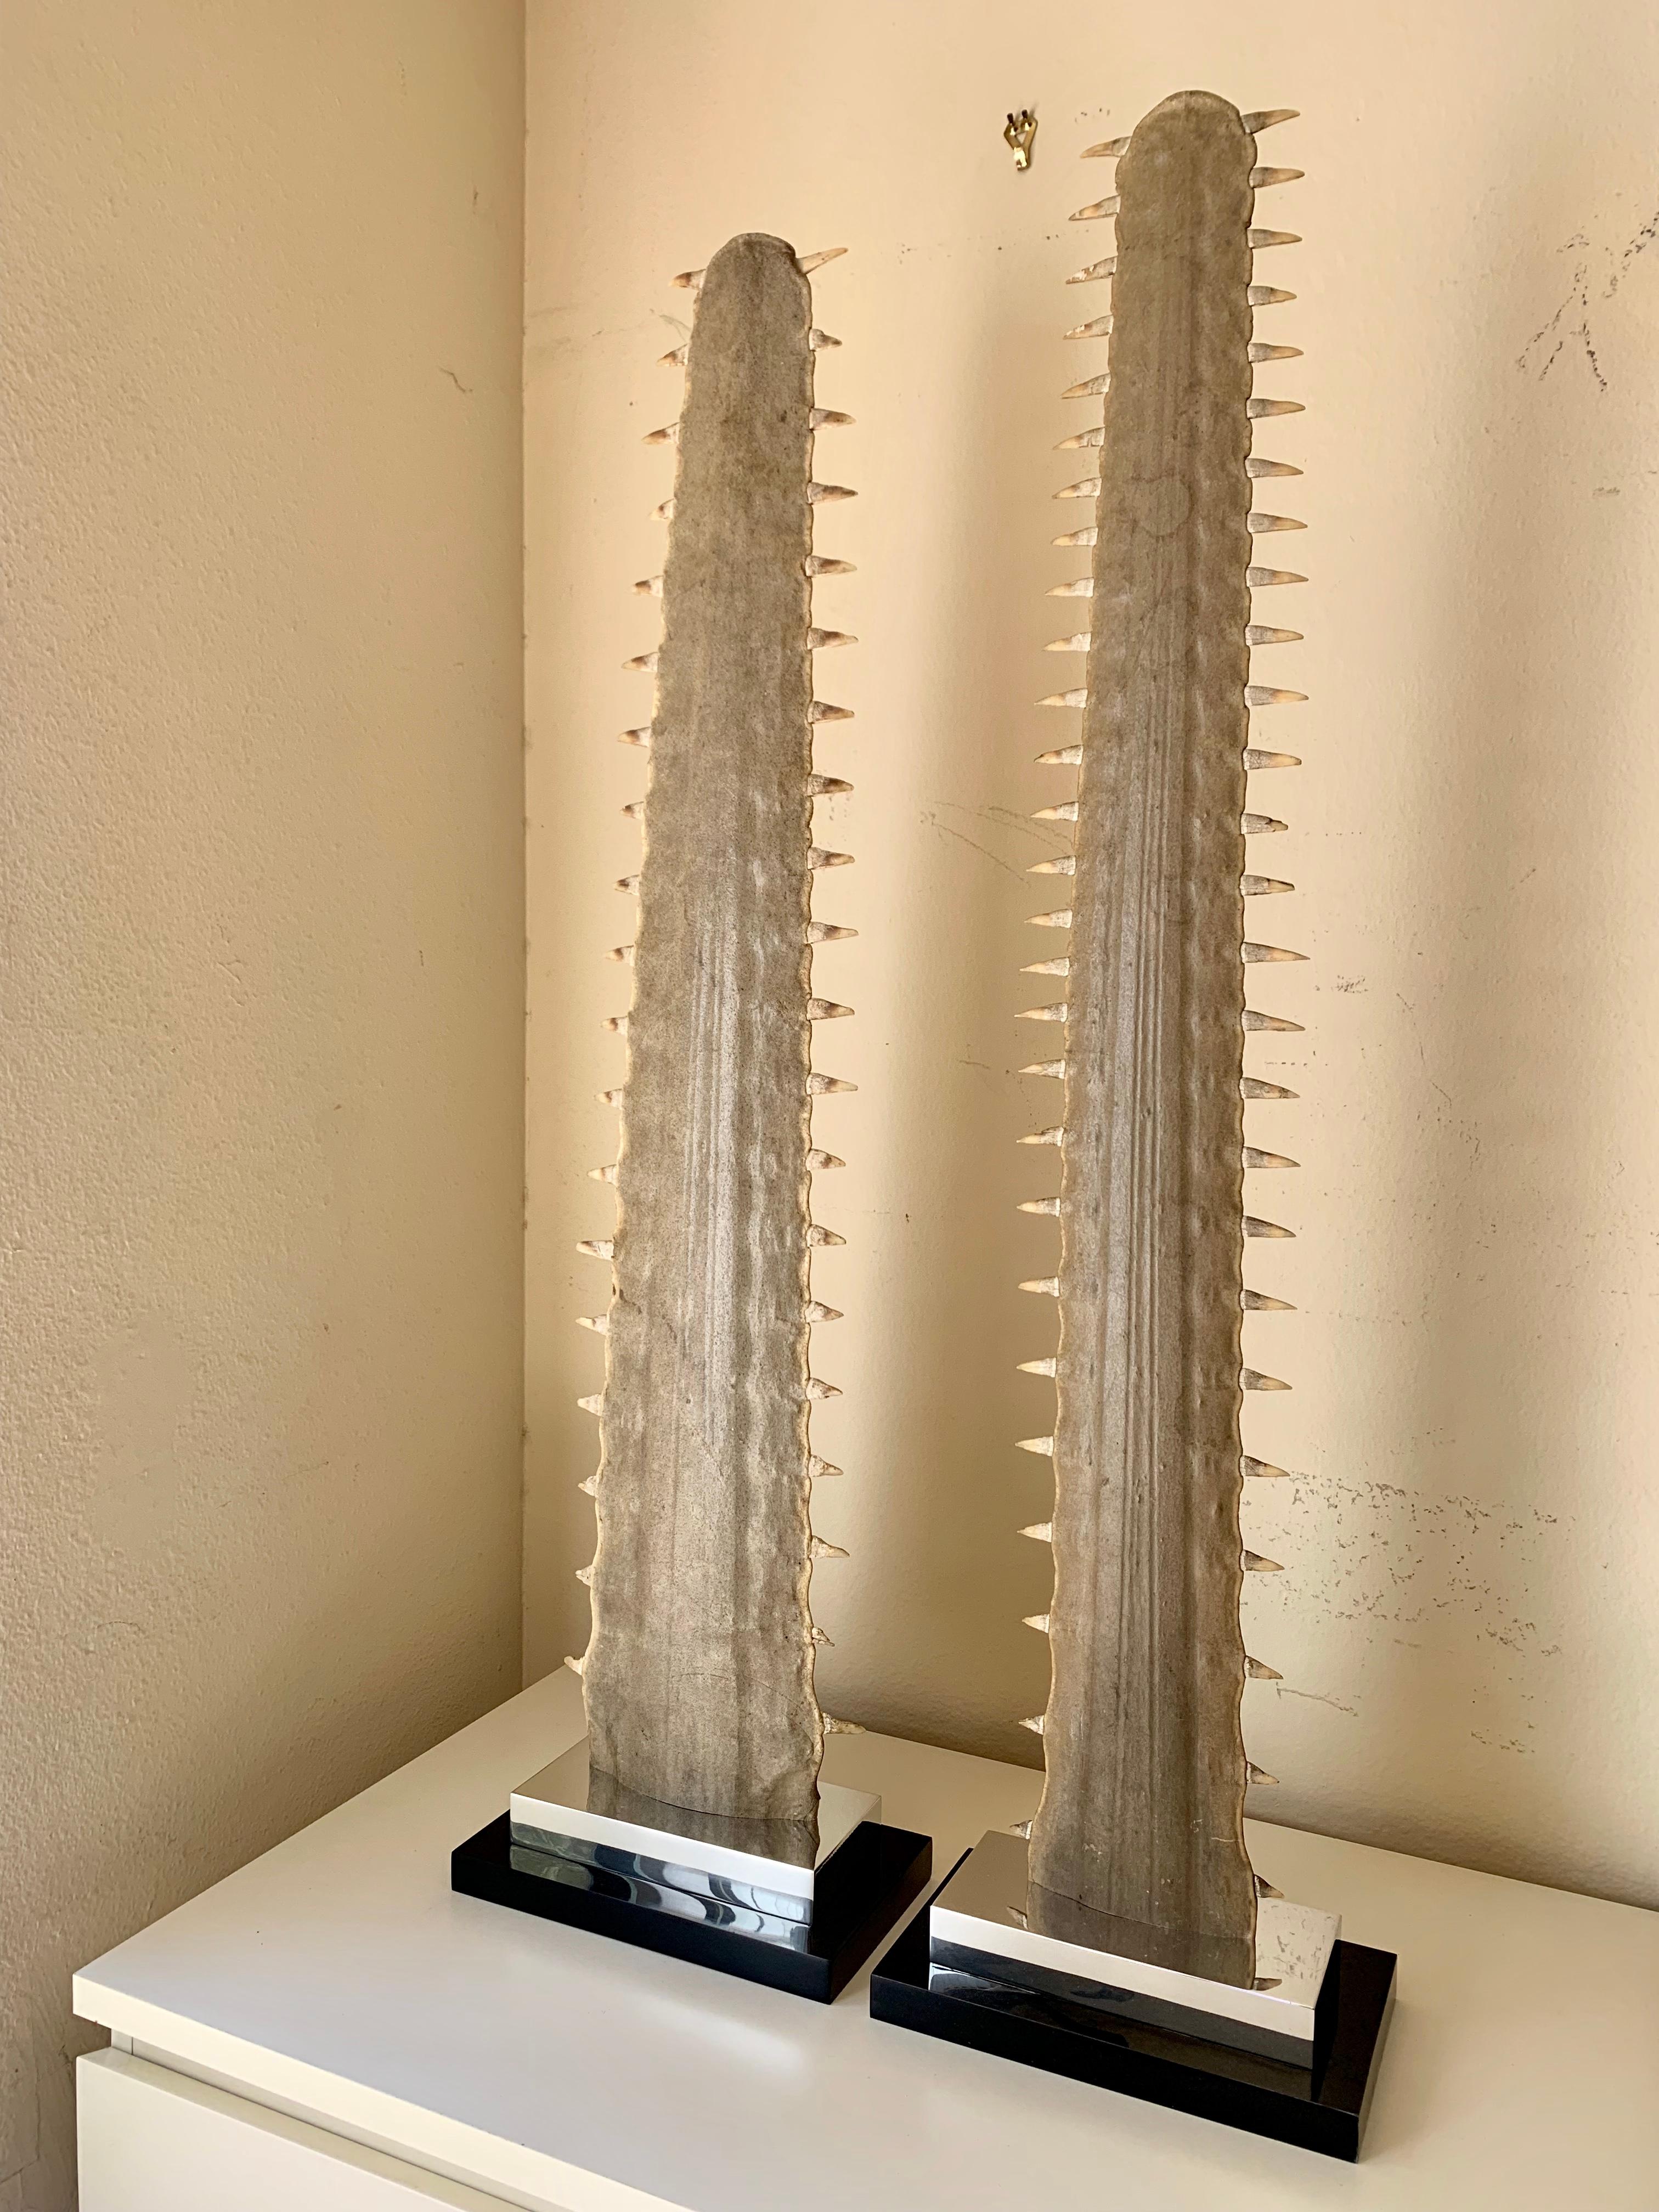 Pair of large sawfish bill rostrums mounted on black acrylic base. These can only shipped in USA.
Acrylic base is 10